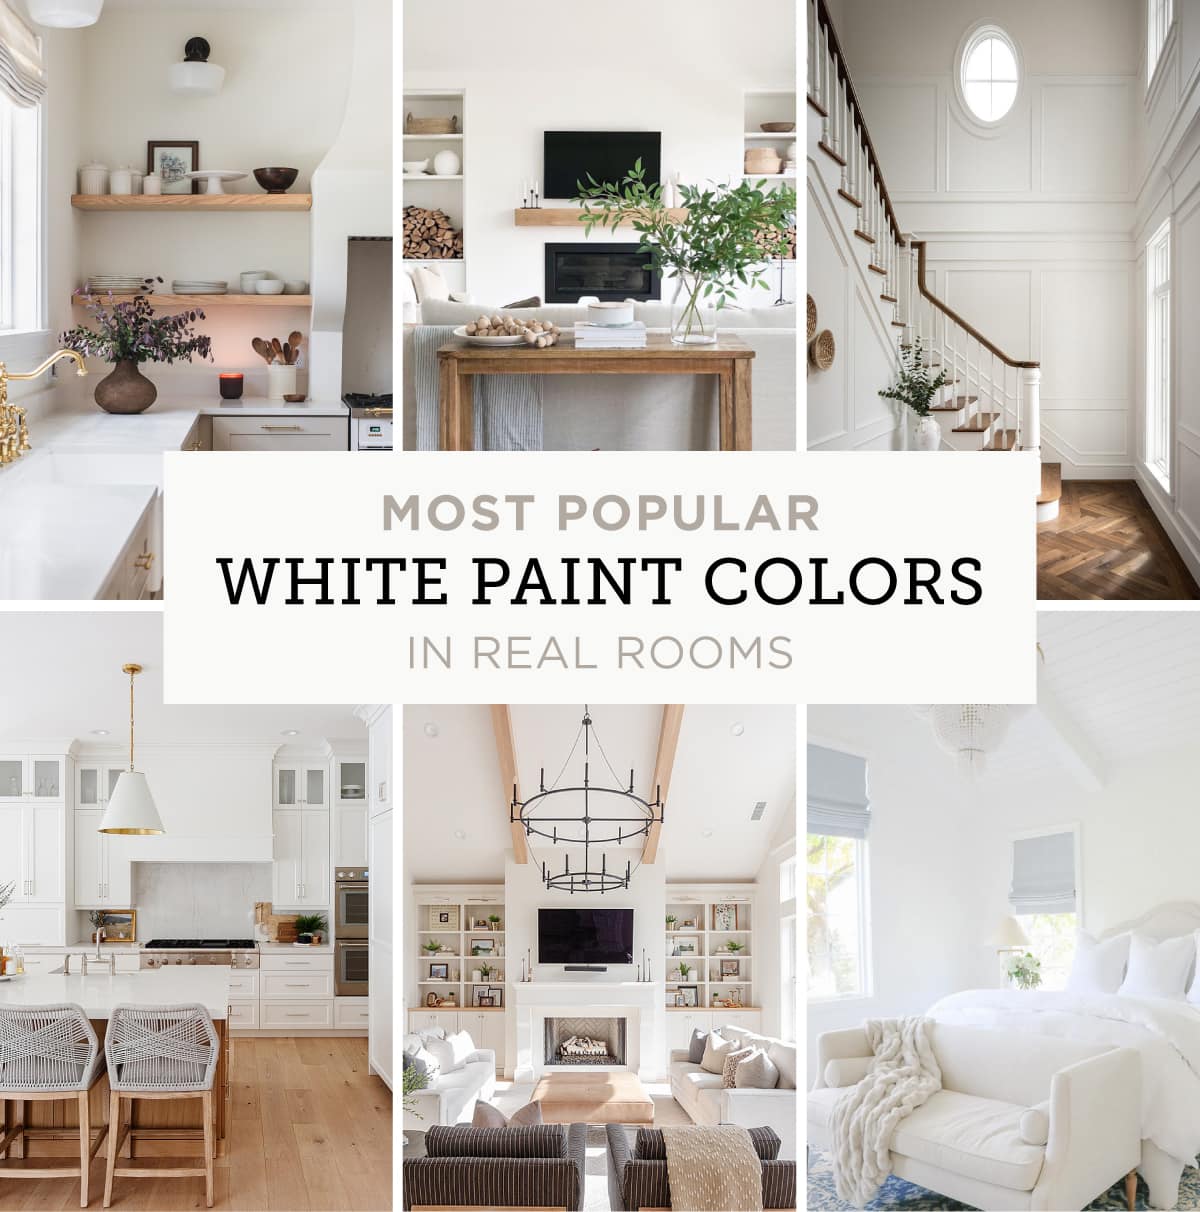 10 best Sherwin Williams off white paint colors - The Paint Color Project